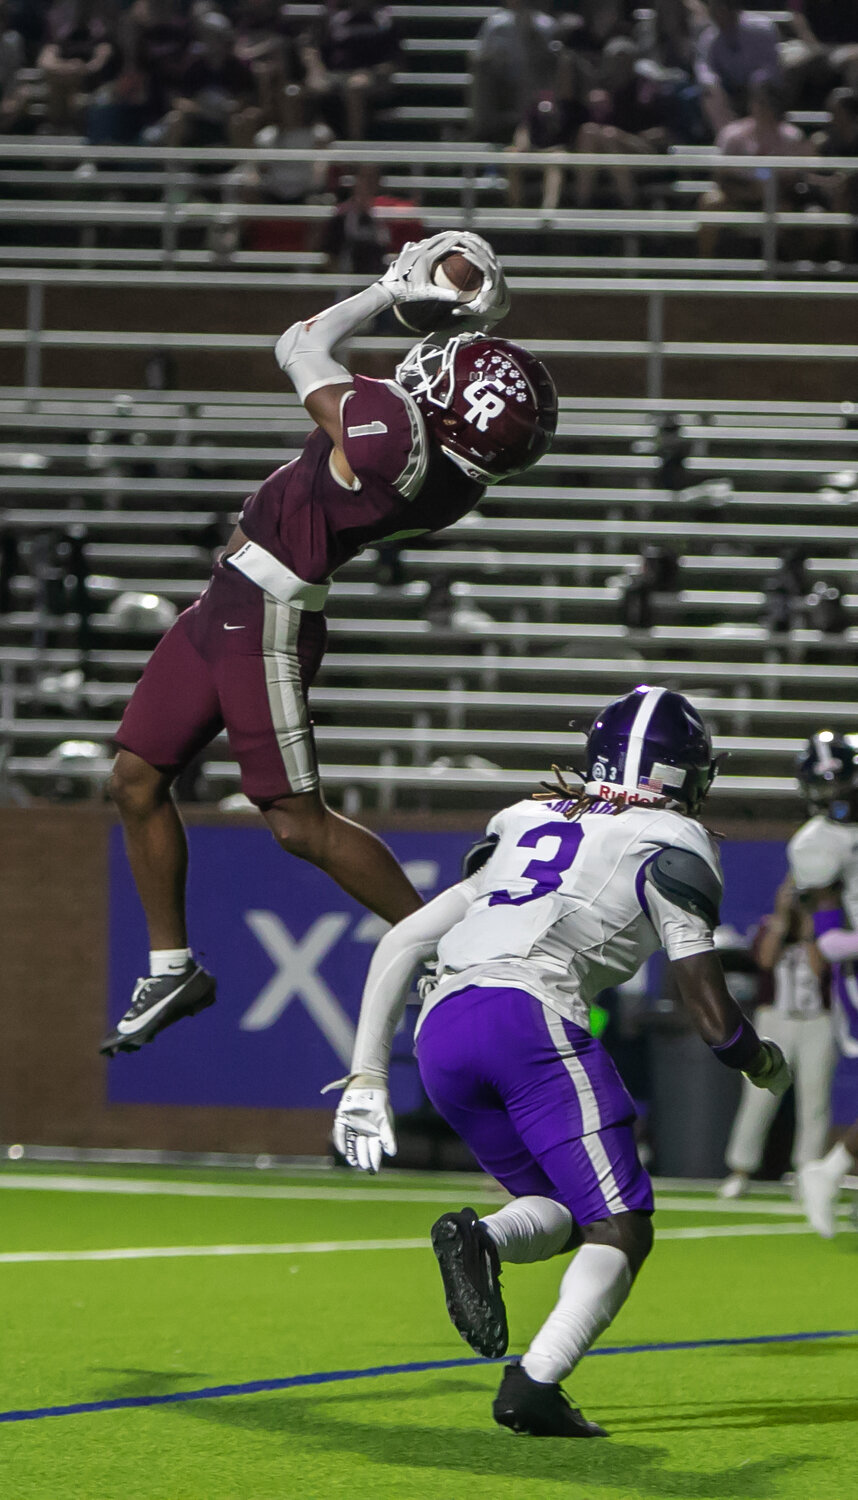 Taytum Johnson makes a catch for a touchdown during Friday's District 19-6A game between Cinco Ranch and Morton Ranch on Friday at Rhodes Stadium.